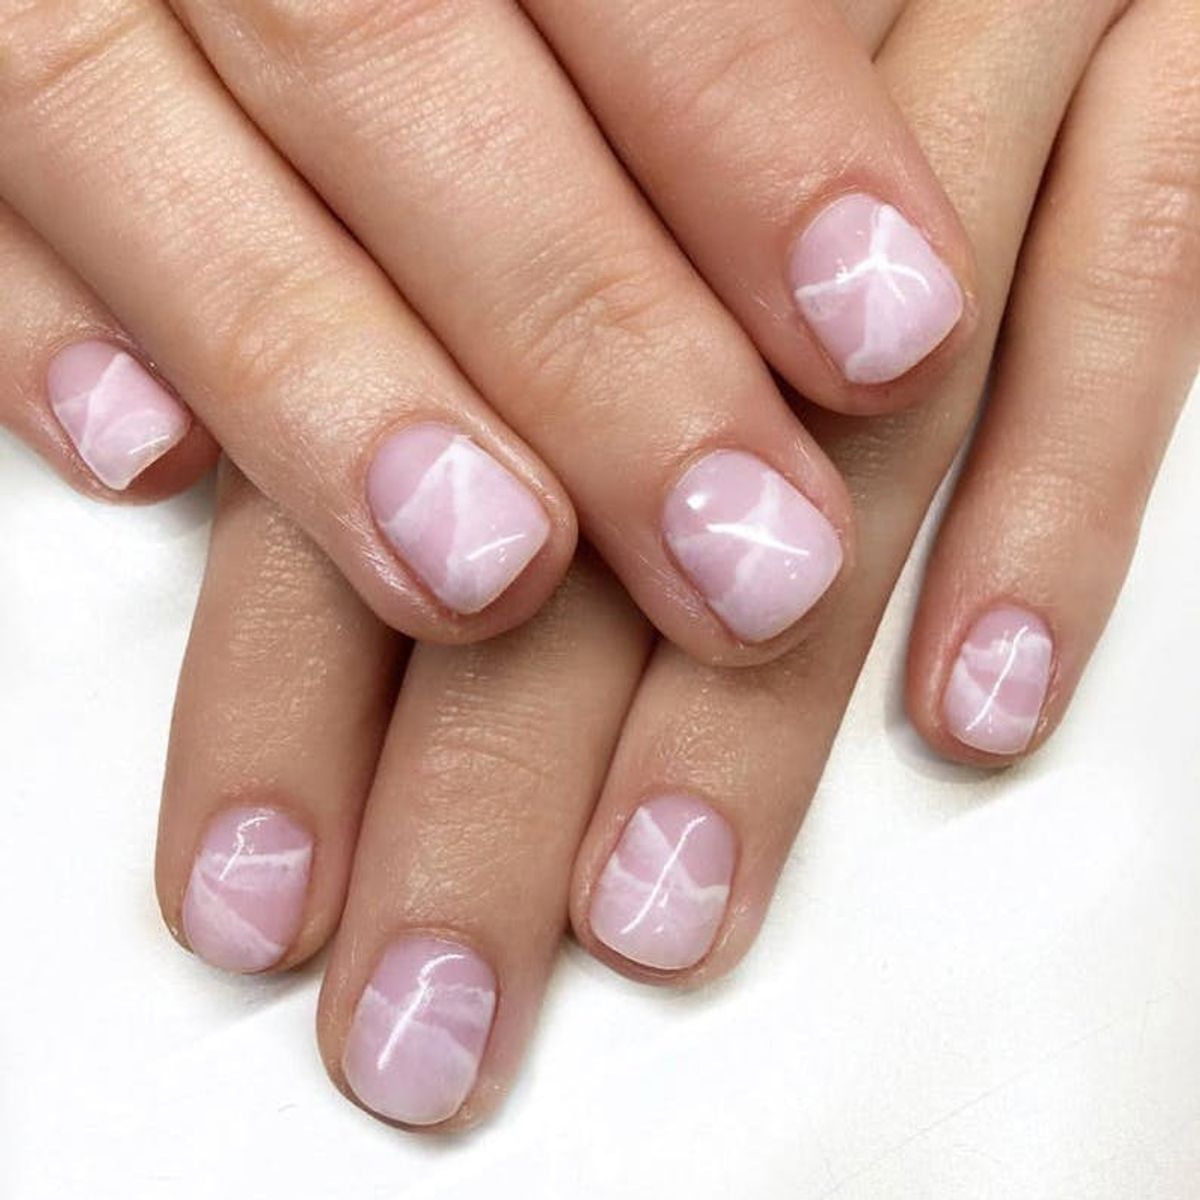 14 Himalayan Salt Manicure Ideas to Update Your Nude Nails